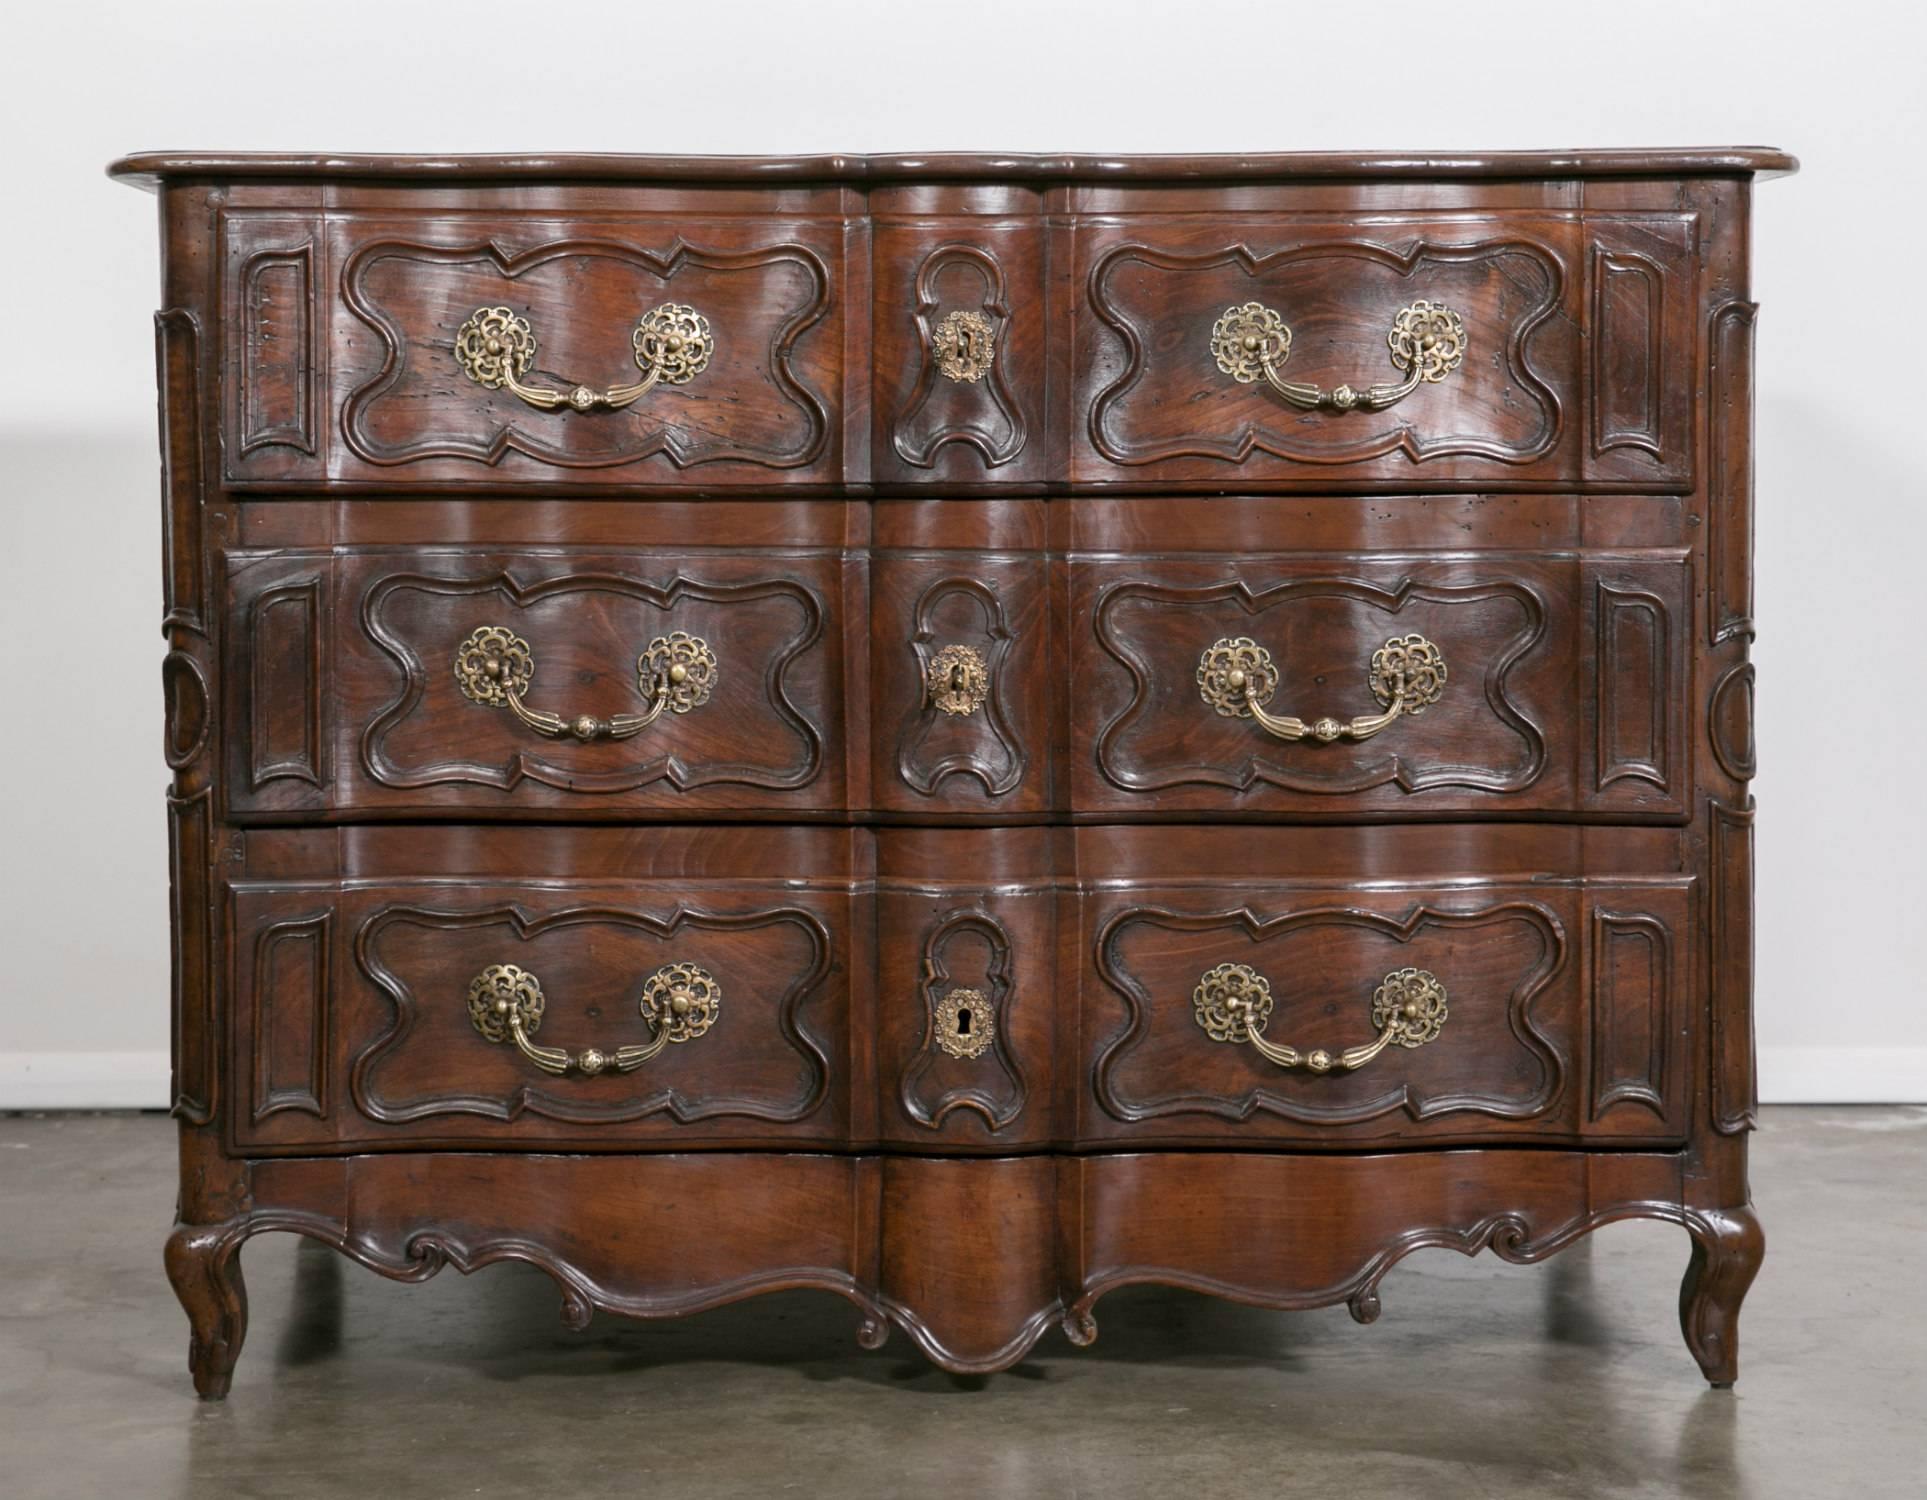 A stunning and impressive 18th century period French Louis XV commode de chateau handcrafted in walnut by skilled artisans of the Lyon region. The front facade having an arbalete or cross-bow form with three drawers below a solid walnut top with